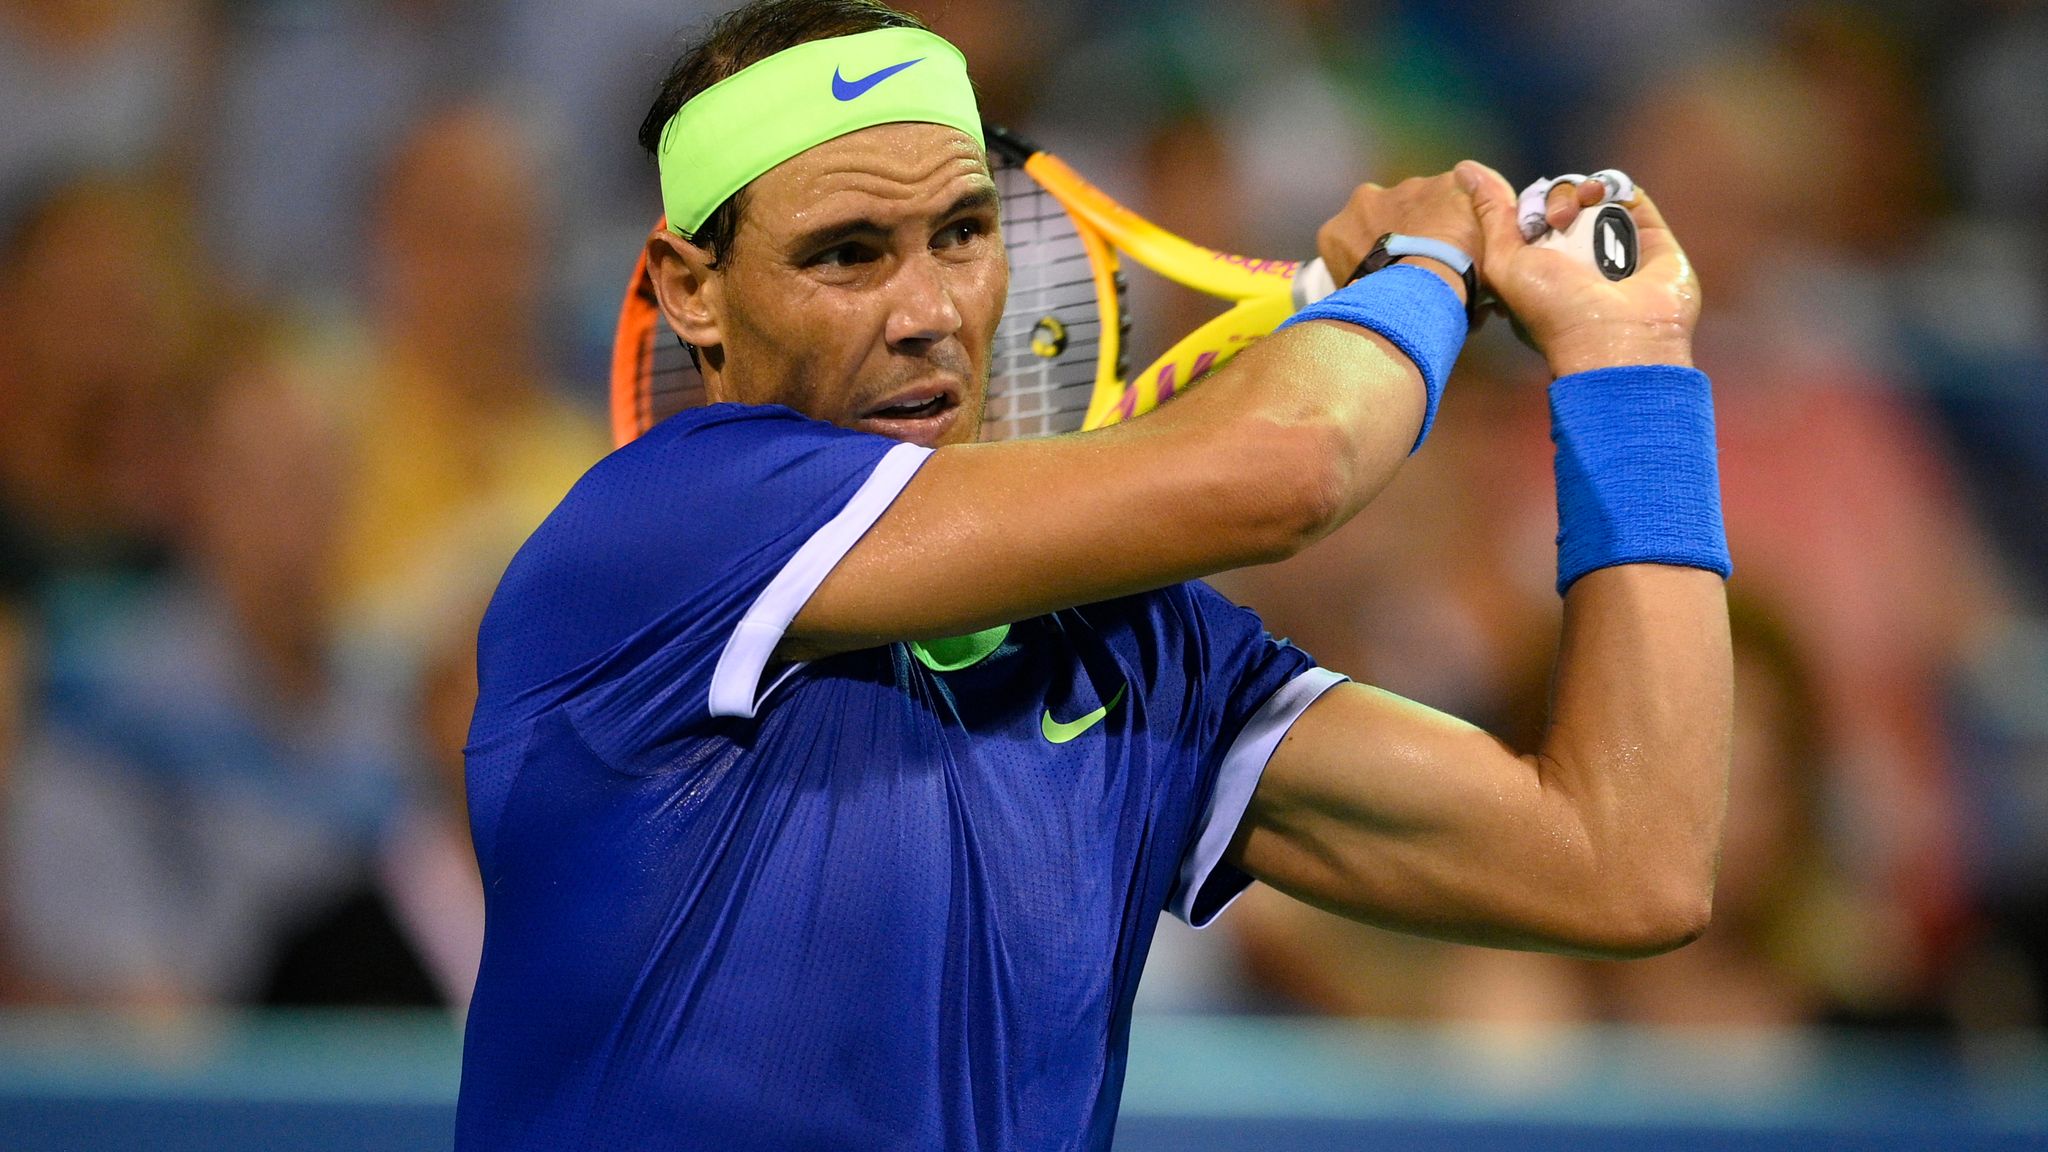 Rafael Nadal Withdraws From National Bank Open In Toronto With Foot Injury Tennis News Sky Sports [ 1152 x 2048 Pixel ]